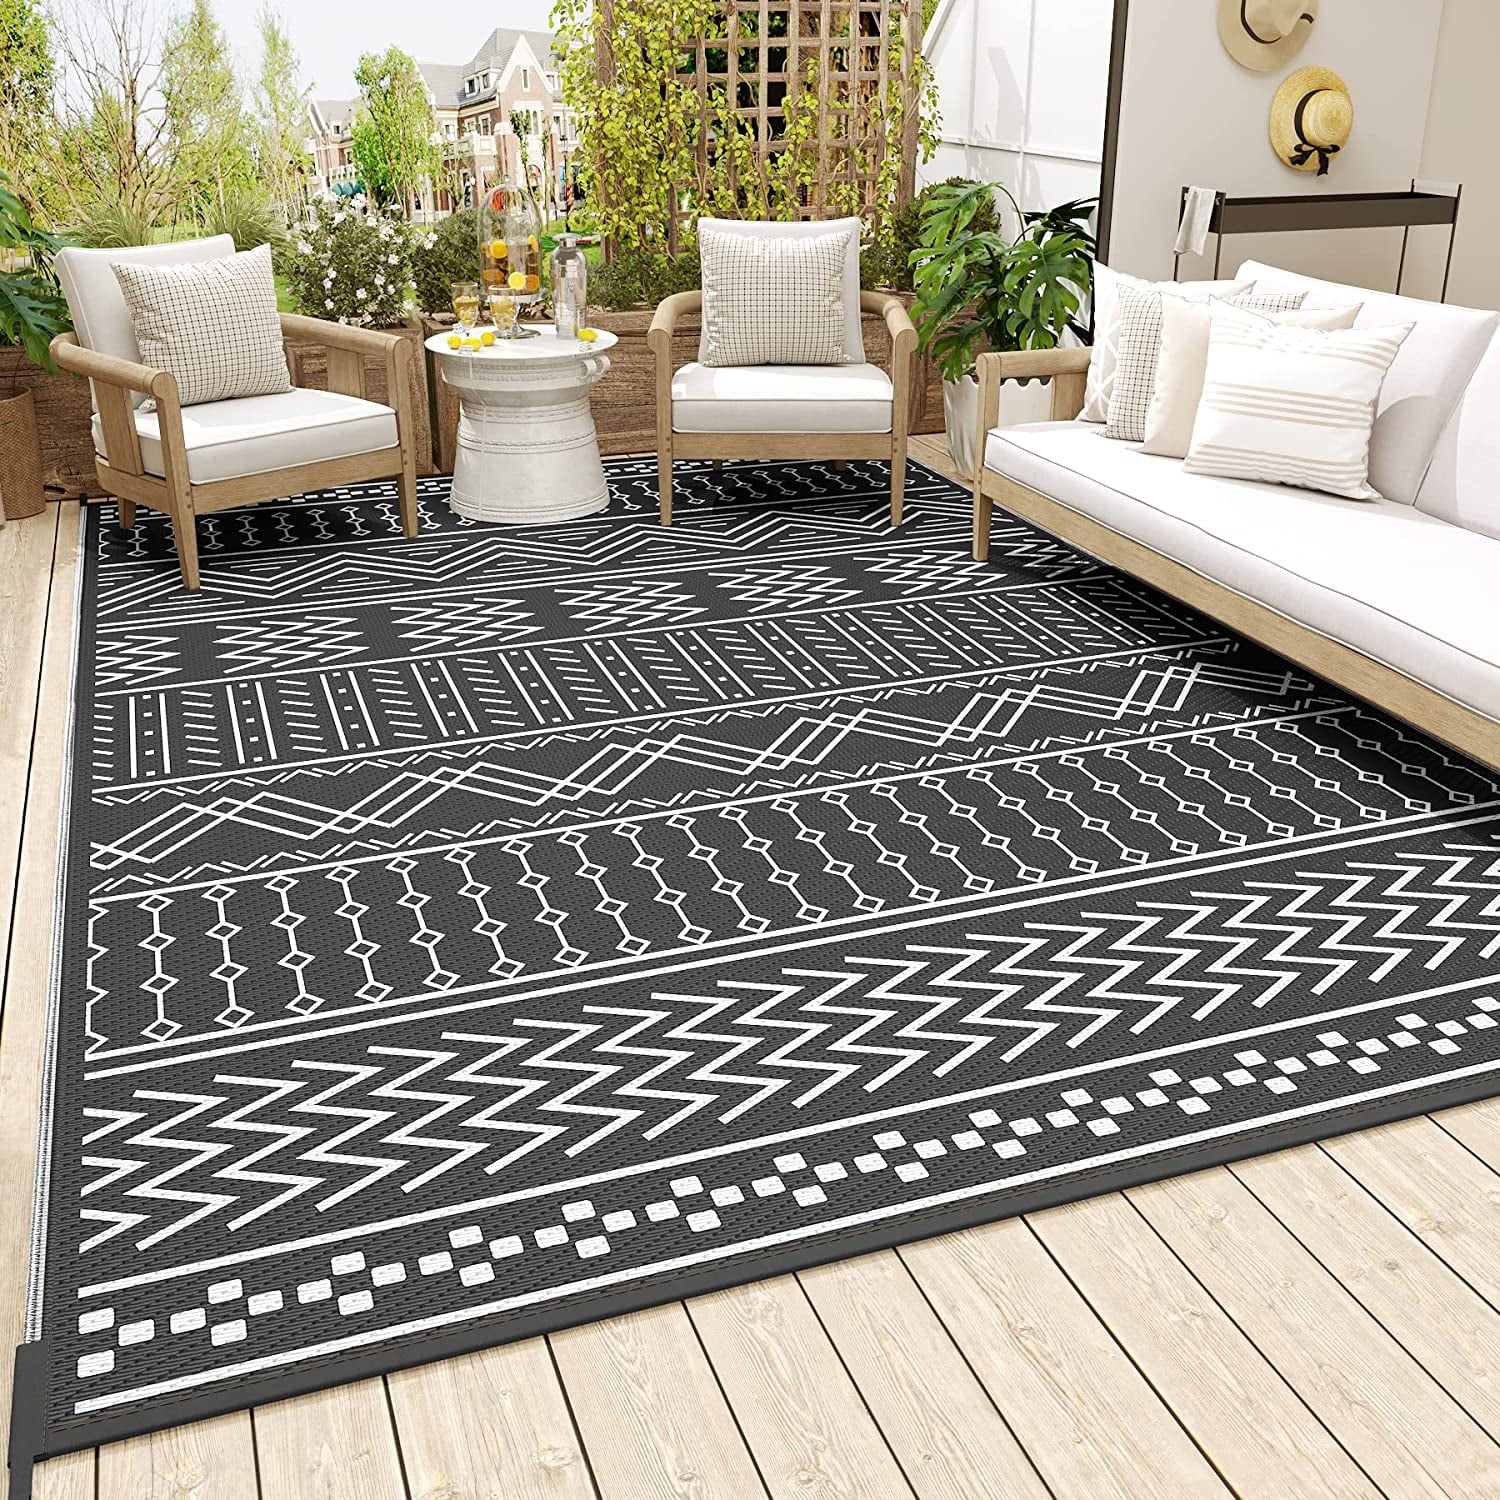 SIXHOME Outdoor Rug 5'x8' Waterproof Patio Rug Reversible Indoor Outdoor Rug Lightweight Plastic Straw Rug for RV Camping Deck Balcony Boho Porch Decor Black and White - image 1 of 10